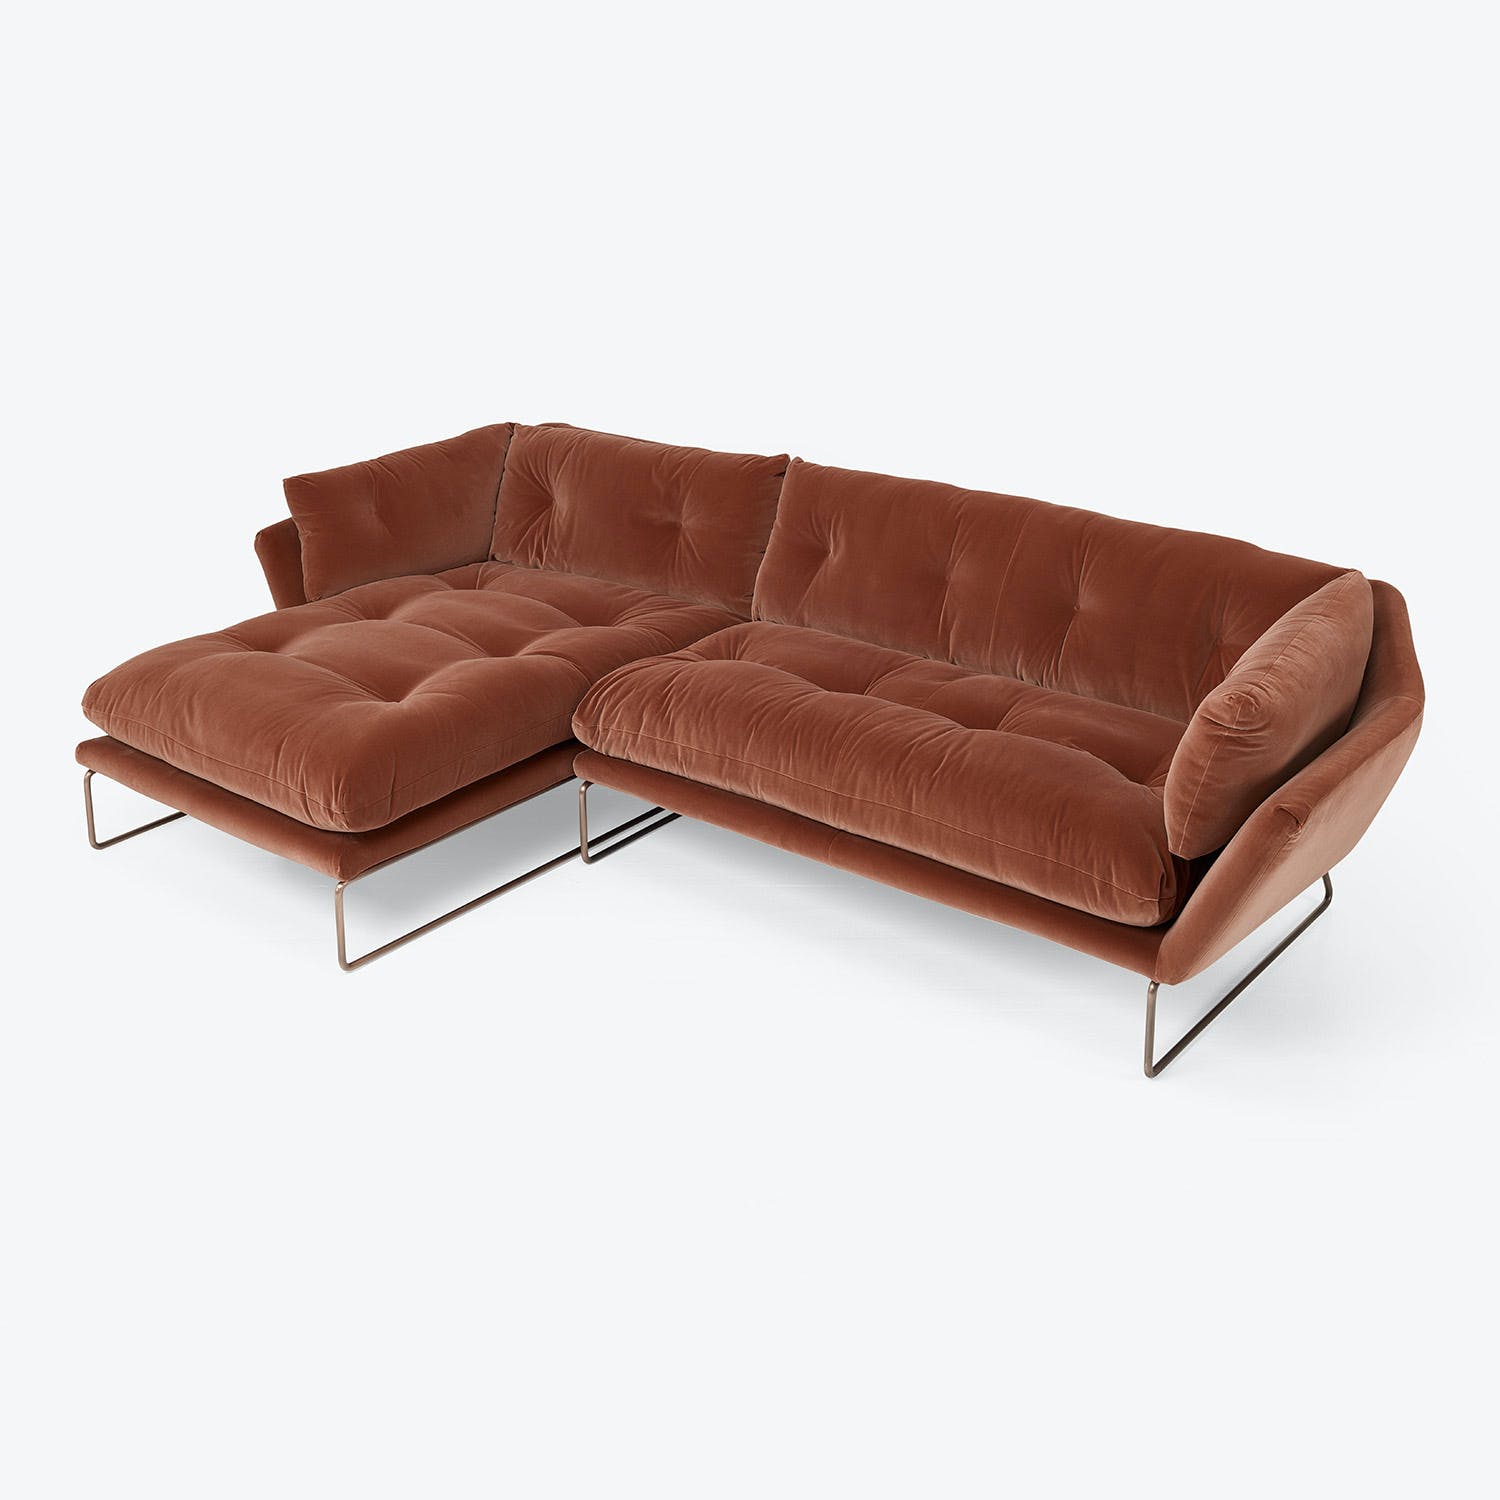 New York Suite Sectional brick suede sofa terracotta furniture